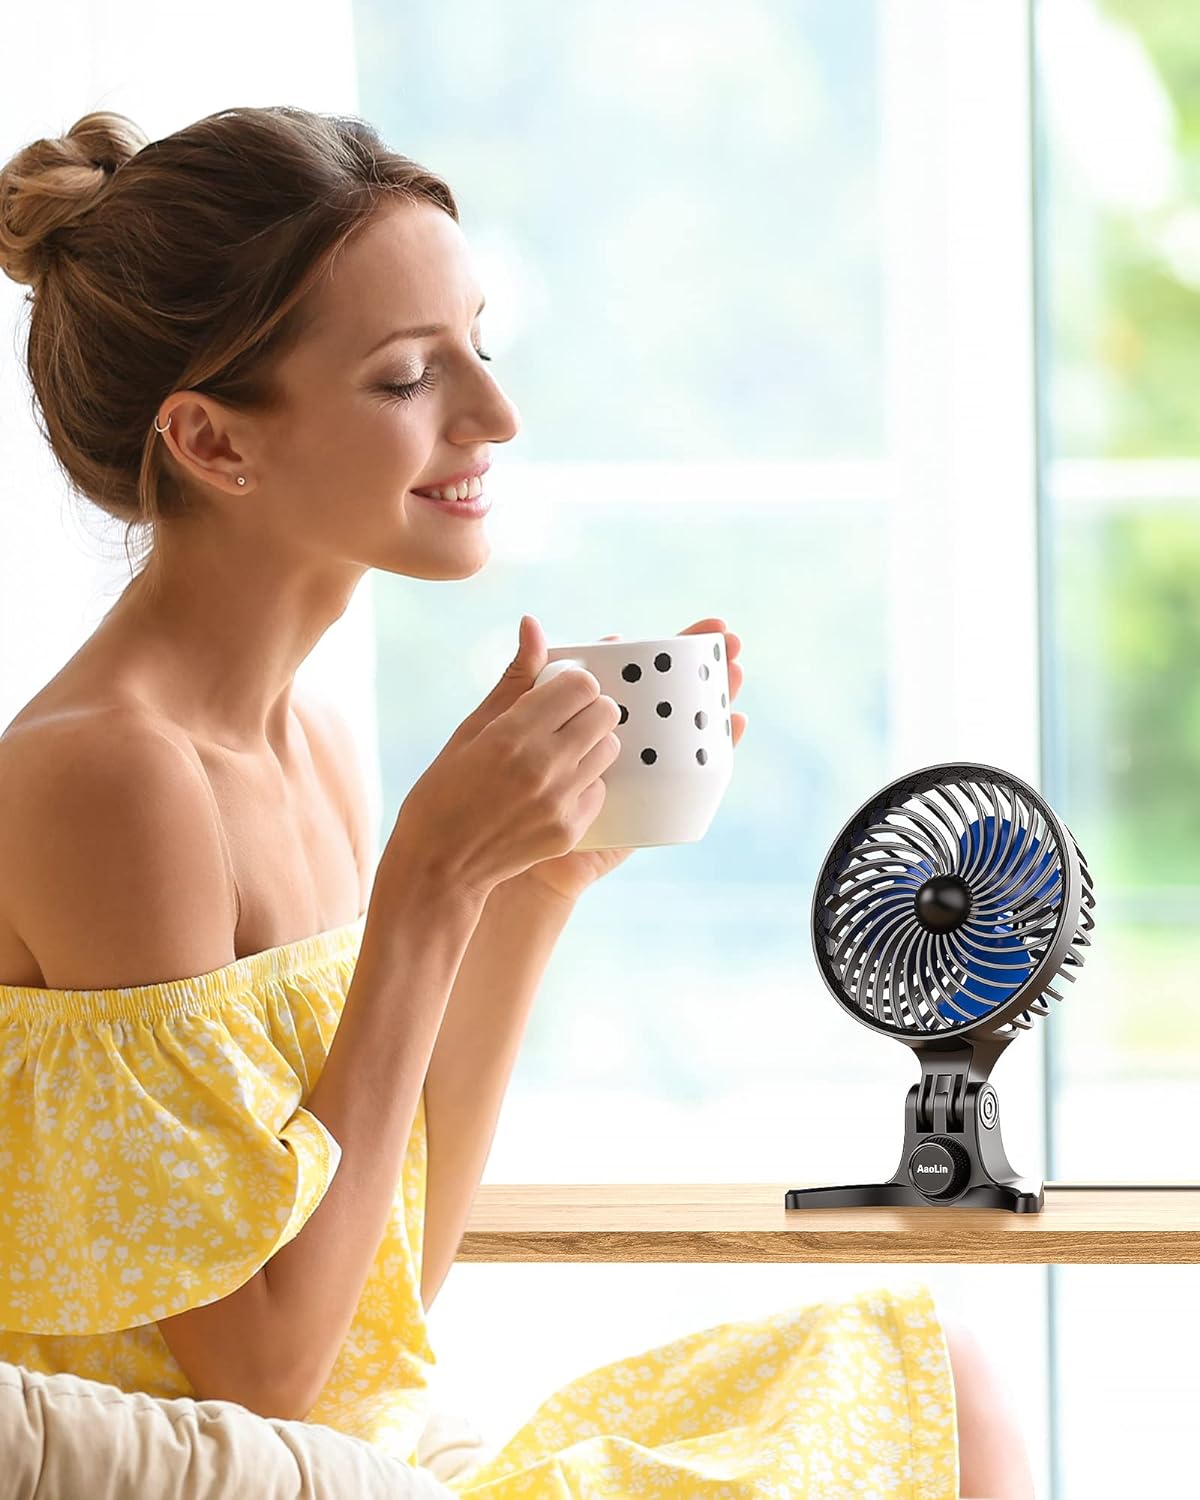 AaoLin USB Desk Fan, Small Fans with CVT Variable Speeds, Strong Cooling Airflow, Quiet Portable, Desktop Mini Personal Table Fan for Room, Home,Office, Bedroom